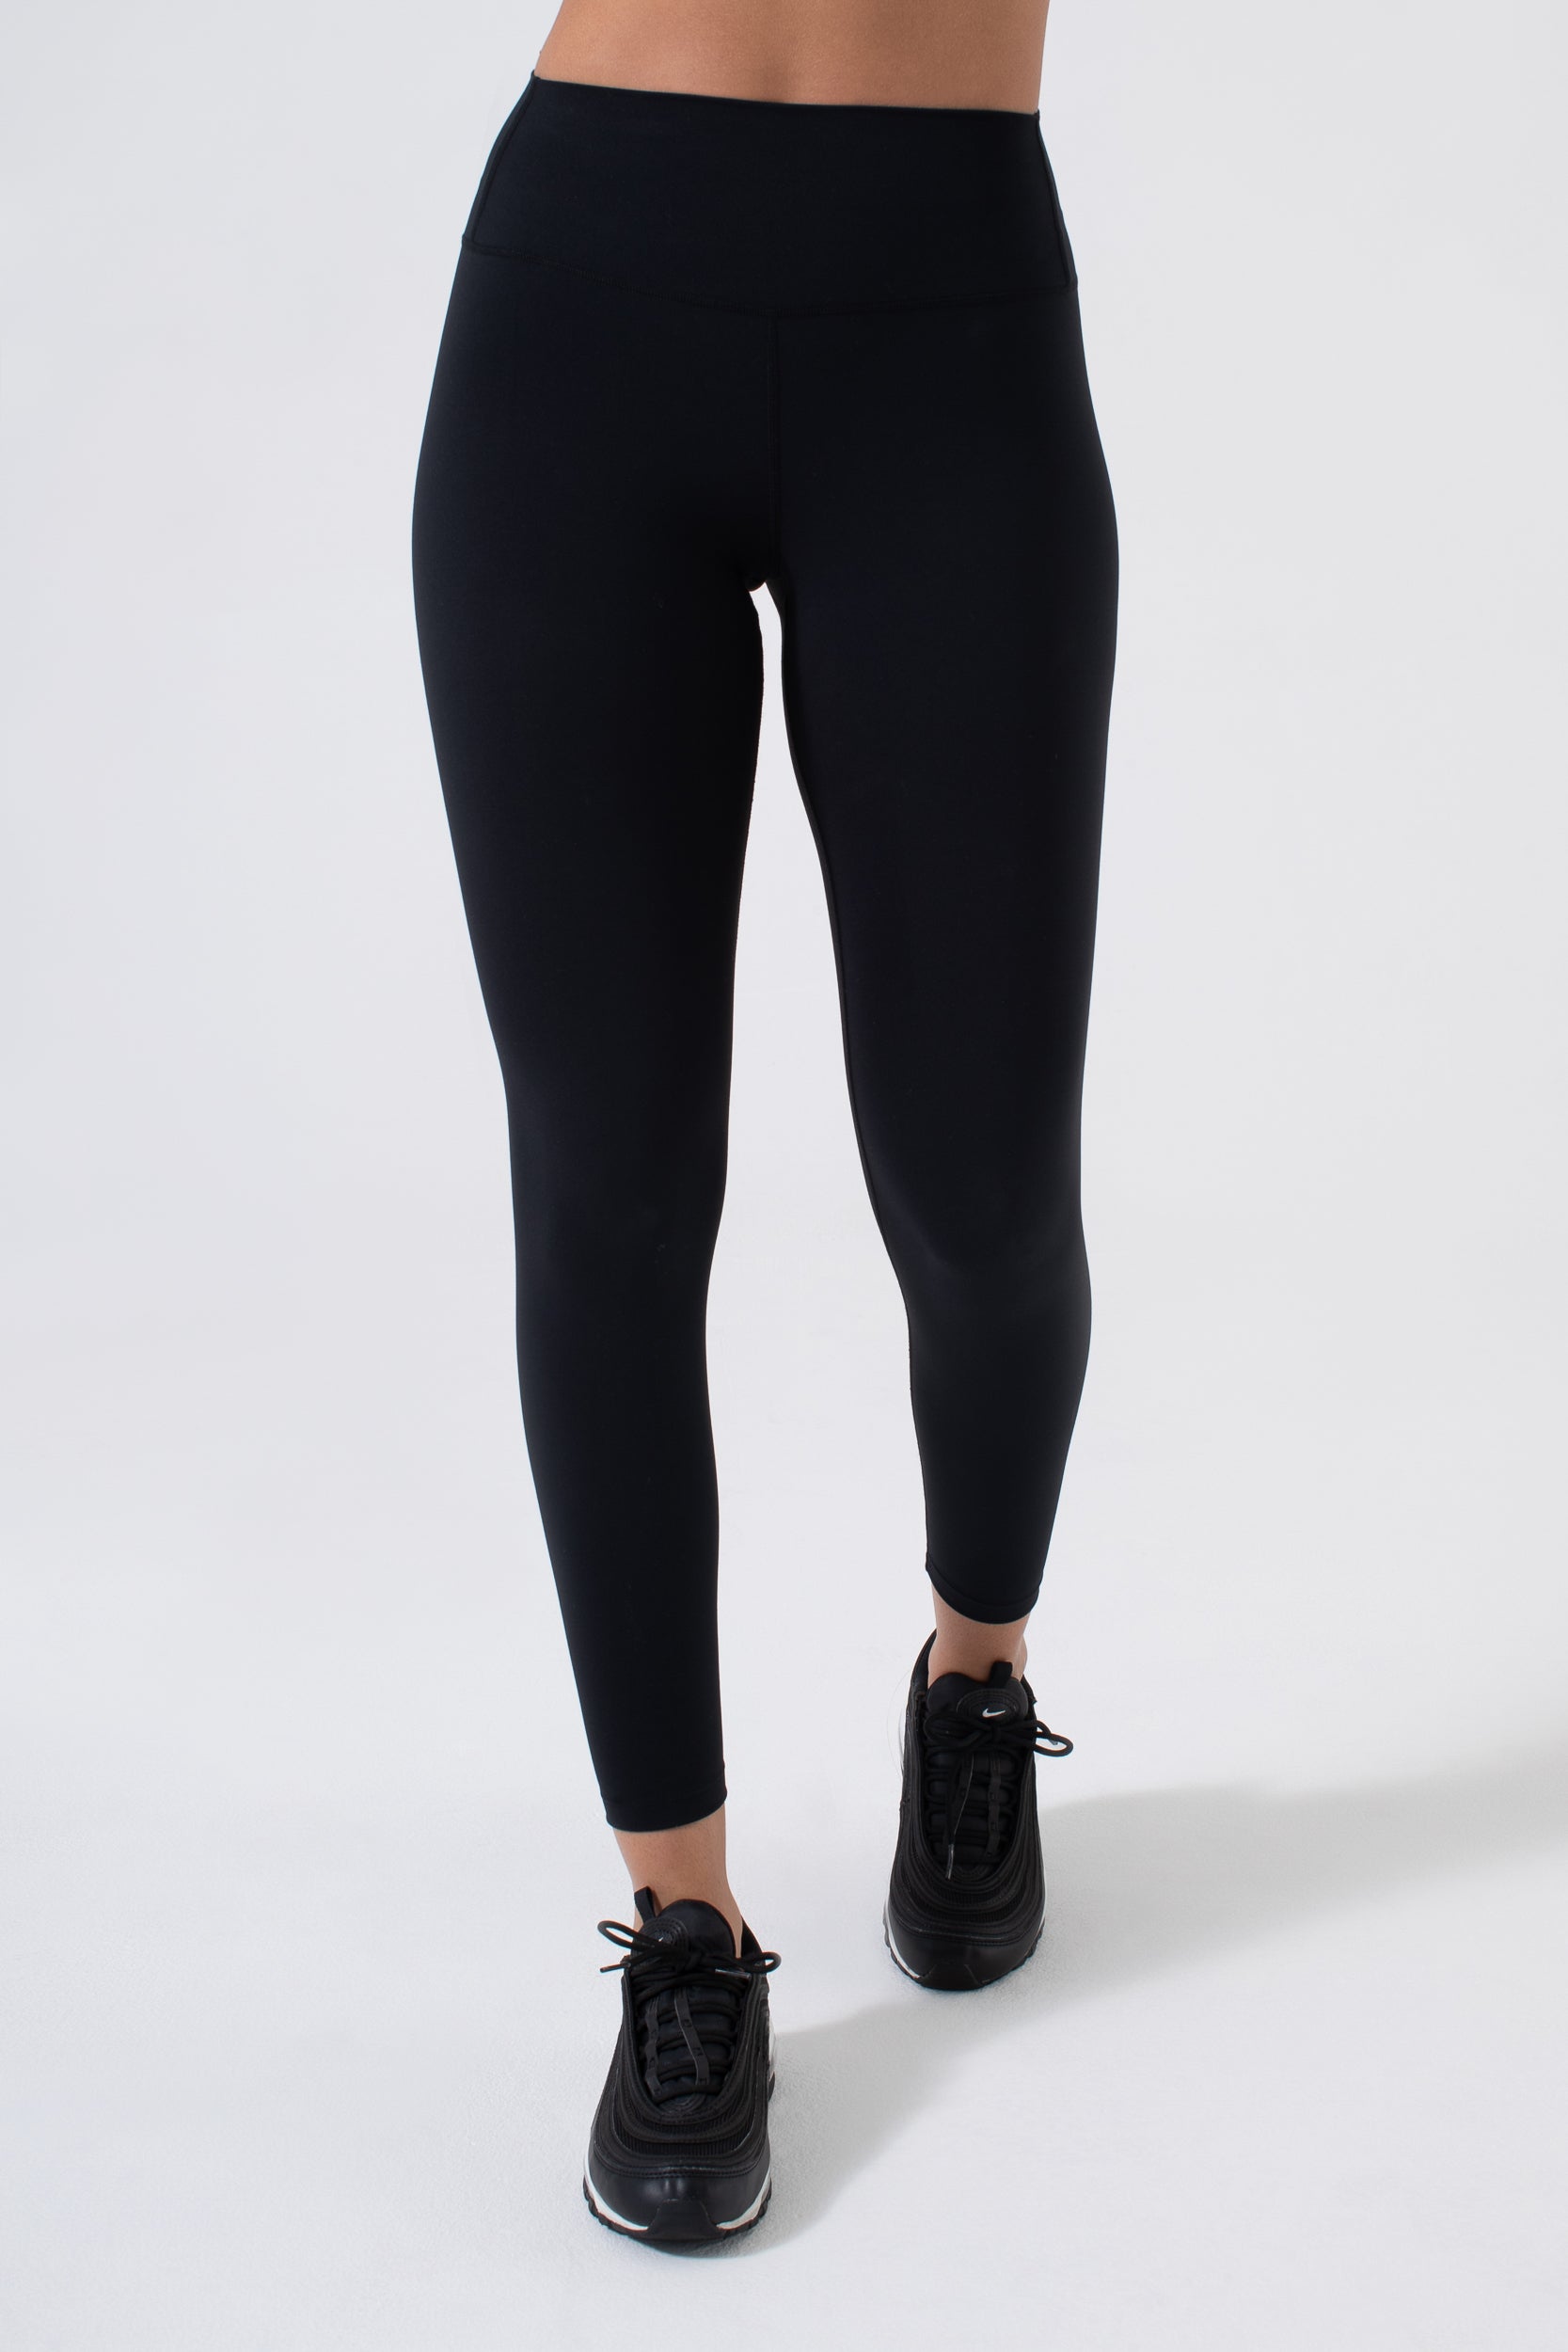 Willow organic cotton high waisted leggings 200gsm - 21 colours